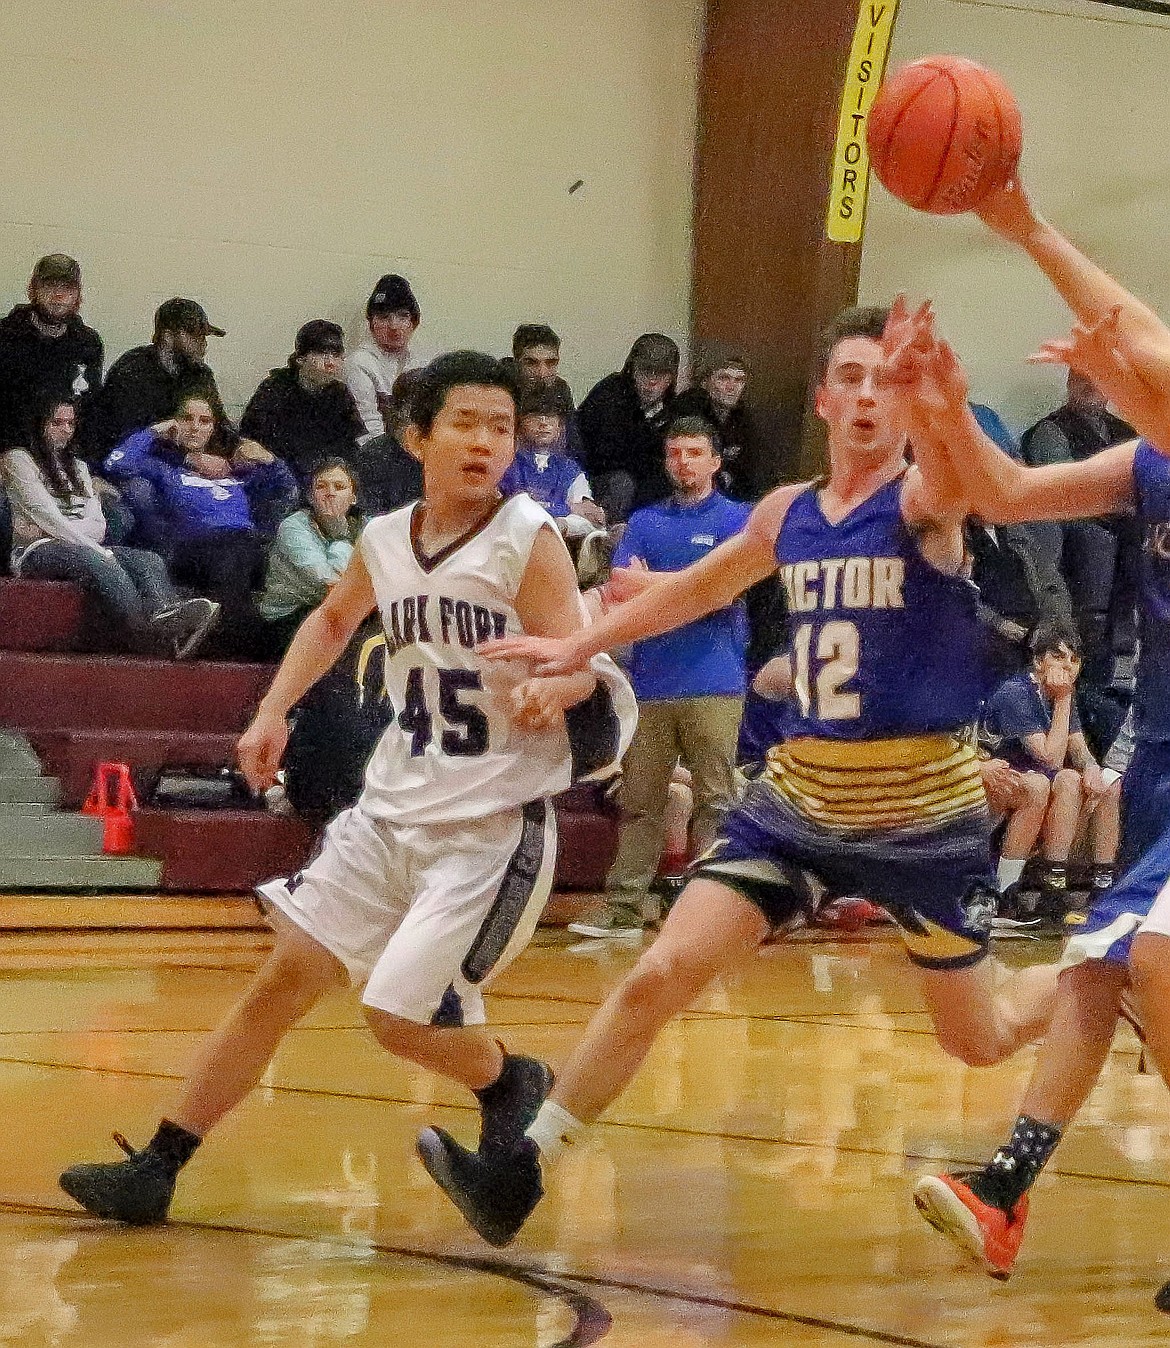 Yu Hsiang Lin from Tiawan is one of five foreign exchange students who make up the Clark Fork Mountain Cats JV team this basketball season. (Photo by Rochelle Knapp)